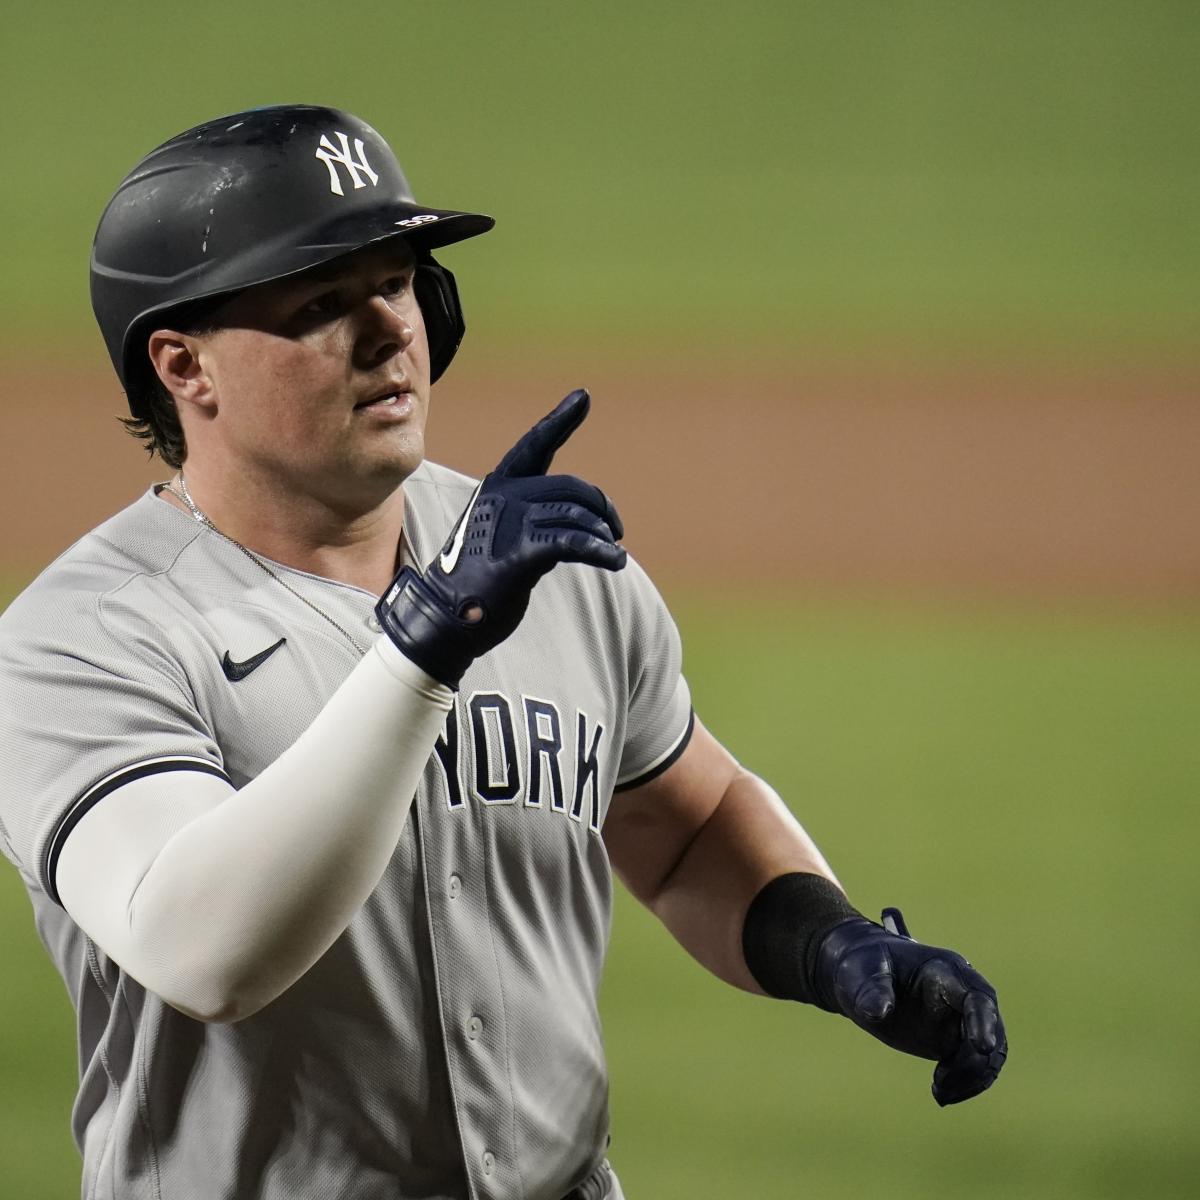 Padres Acquire Luke Voit From Yankees, by FriarWire